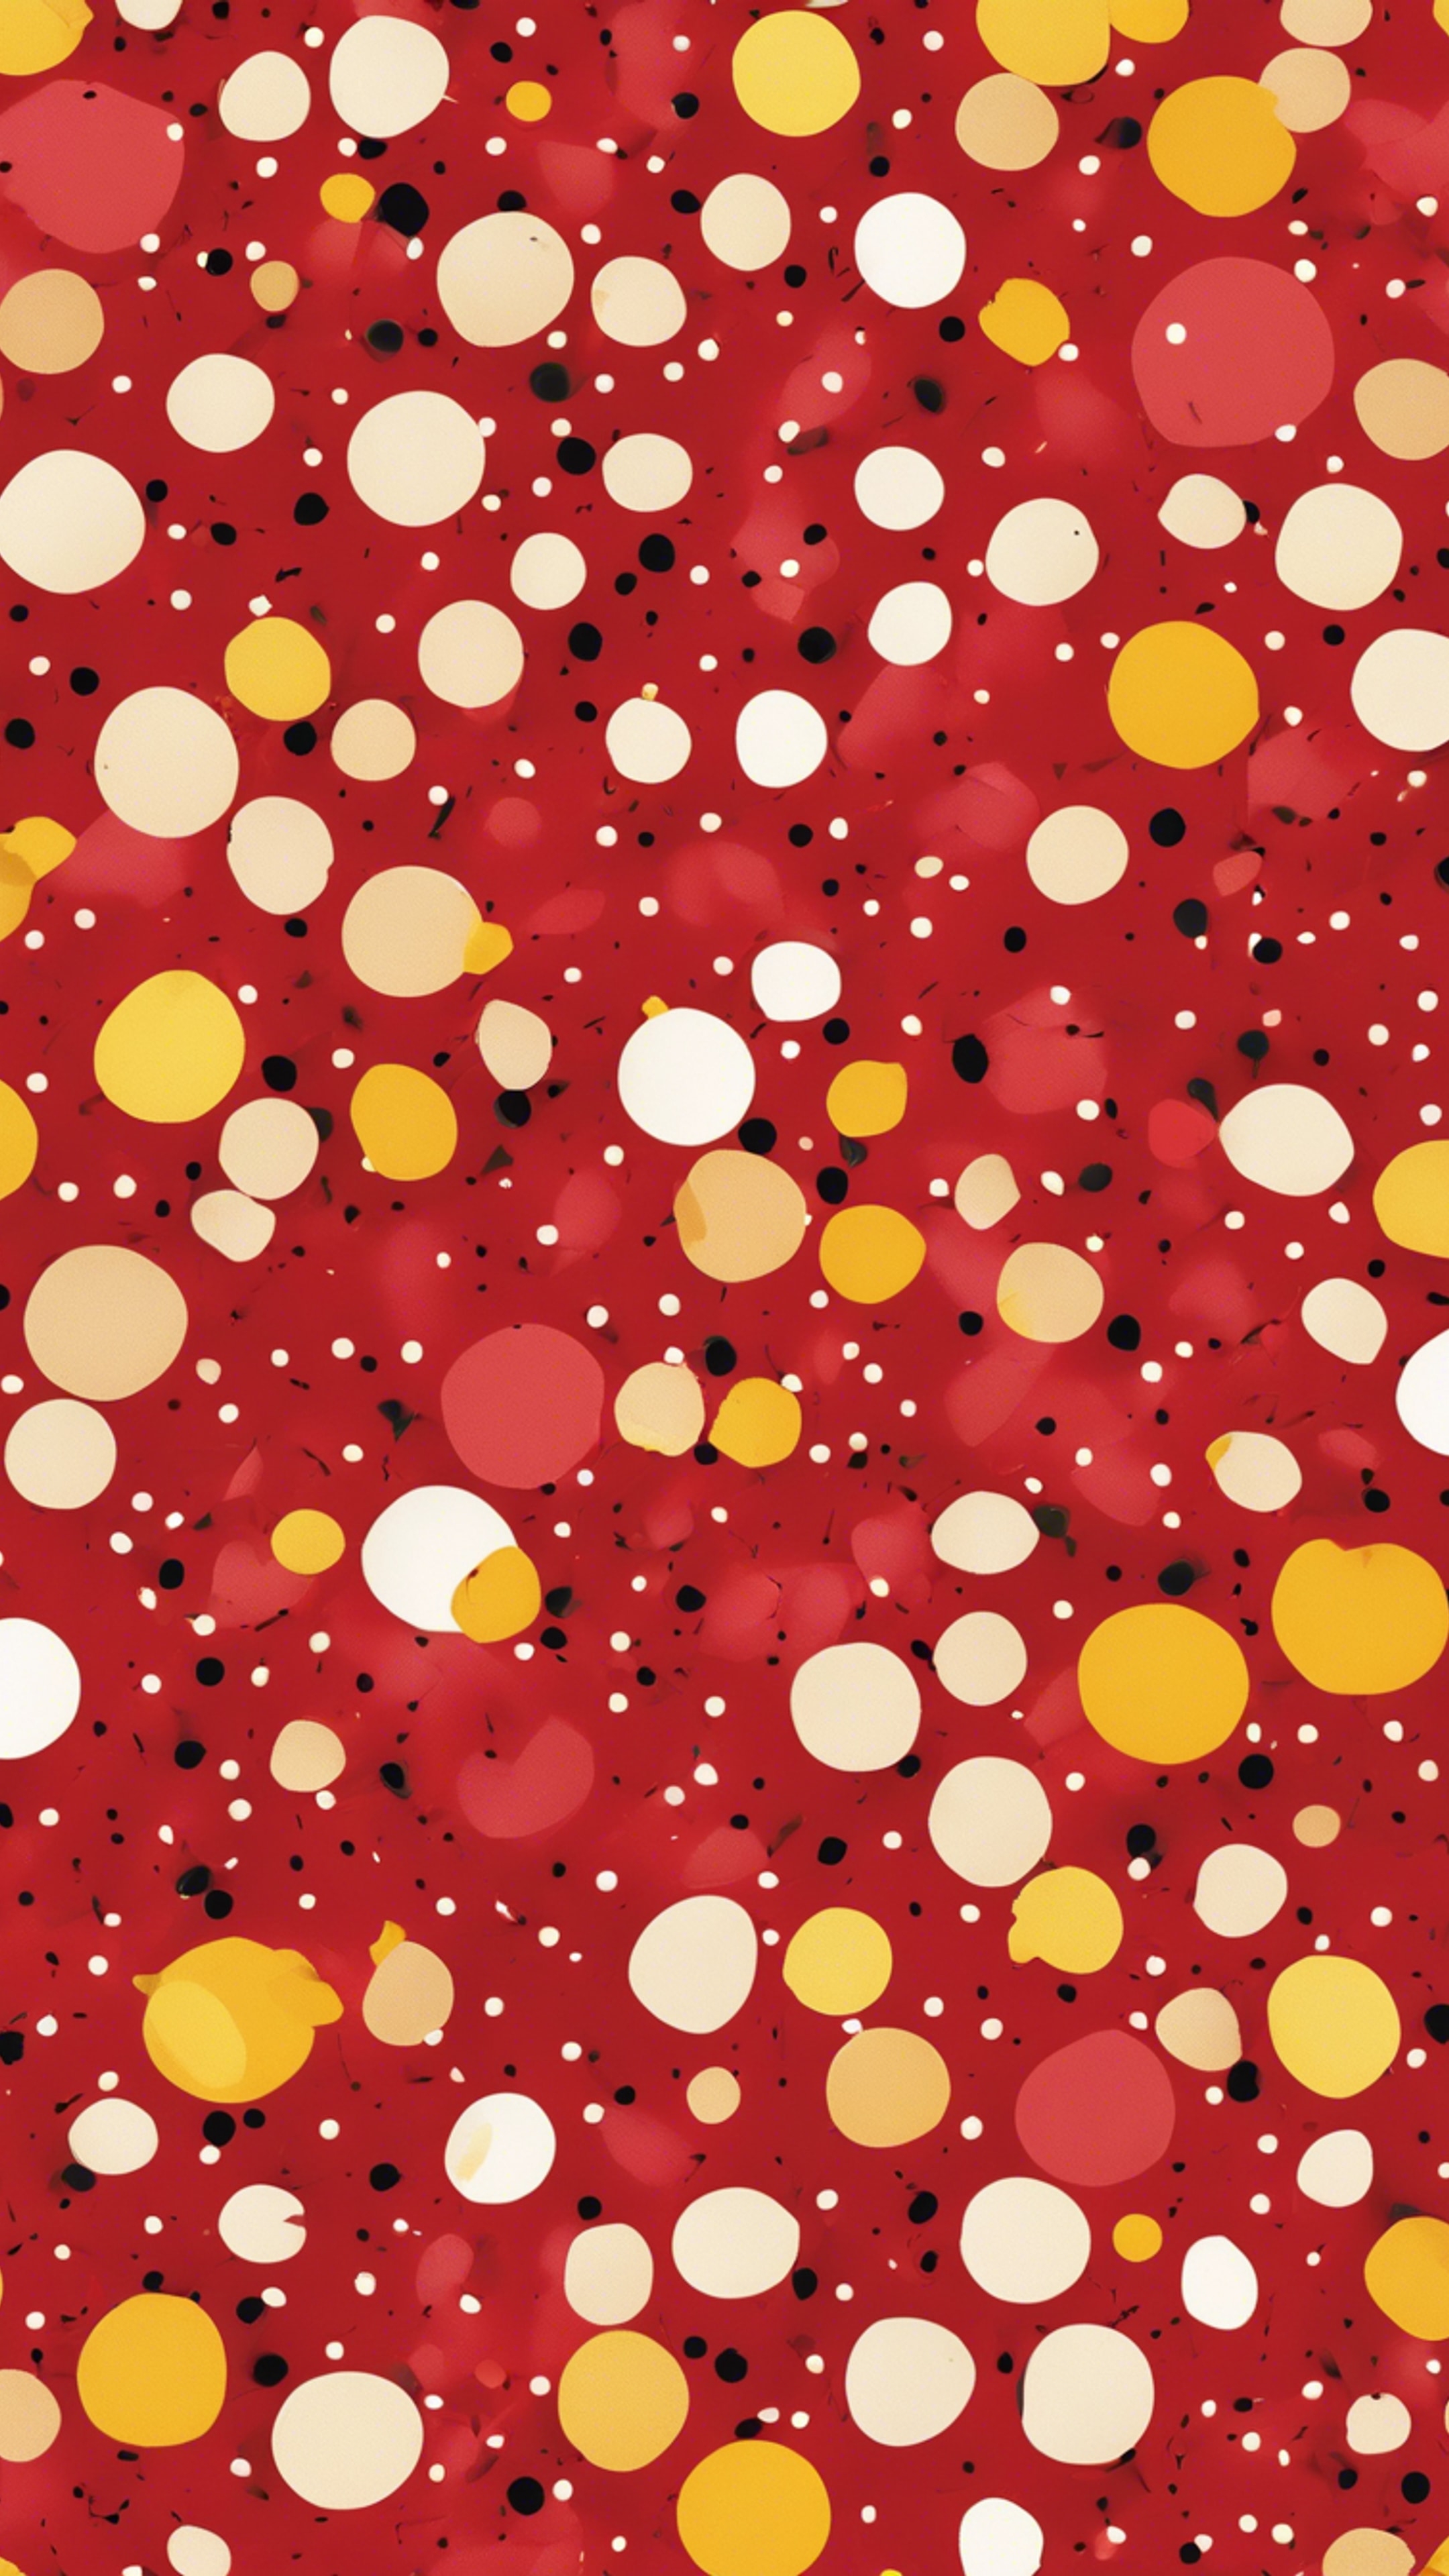 A seamless pattern of vibrant red and vivid yellow, polka dots scattered randomly. Tapetai[206bafc01adc43569588]